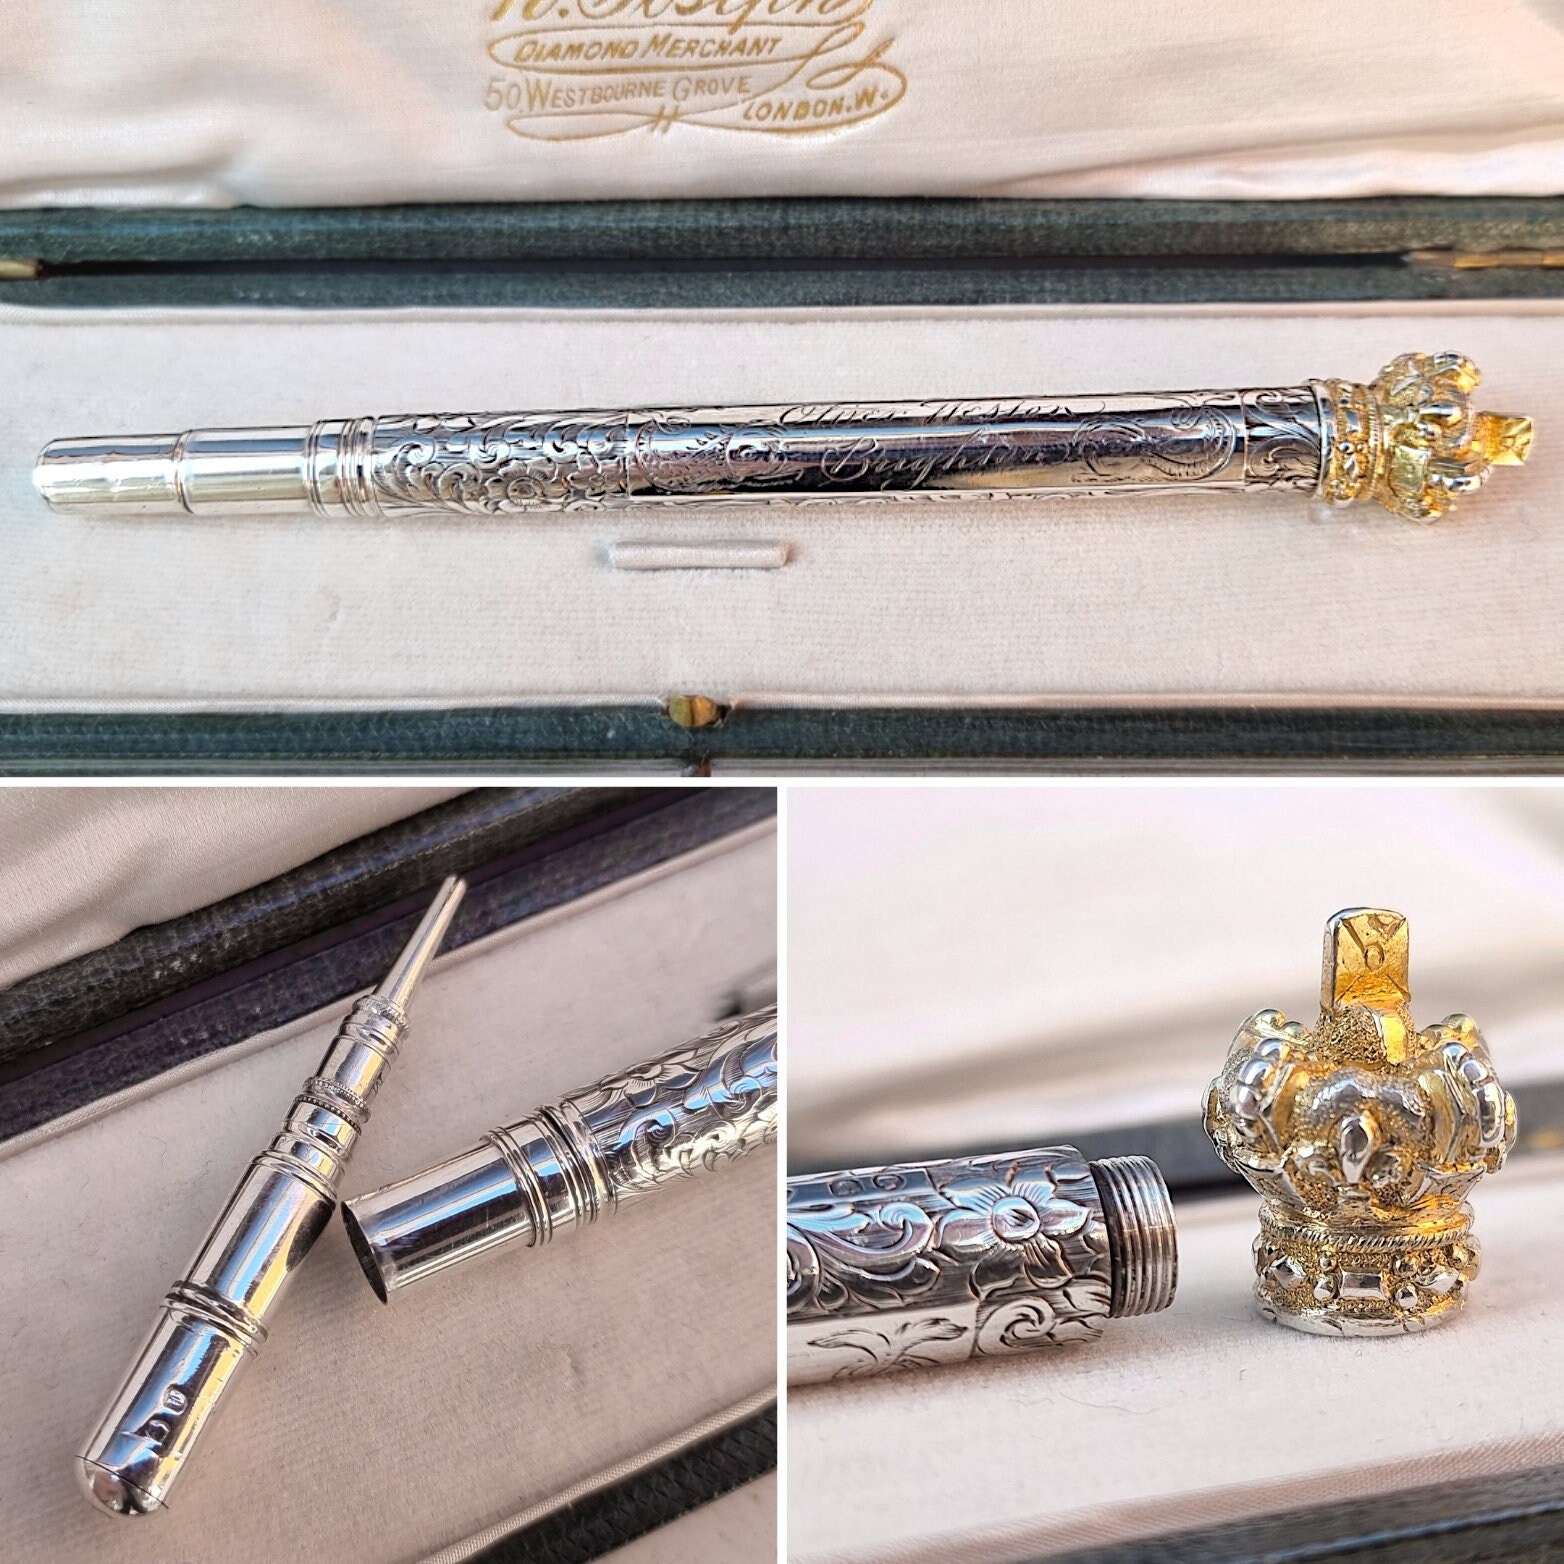 Hallmarked 1848 Victorian Sterling Silver Propelling Pencil by Sampson Mordan